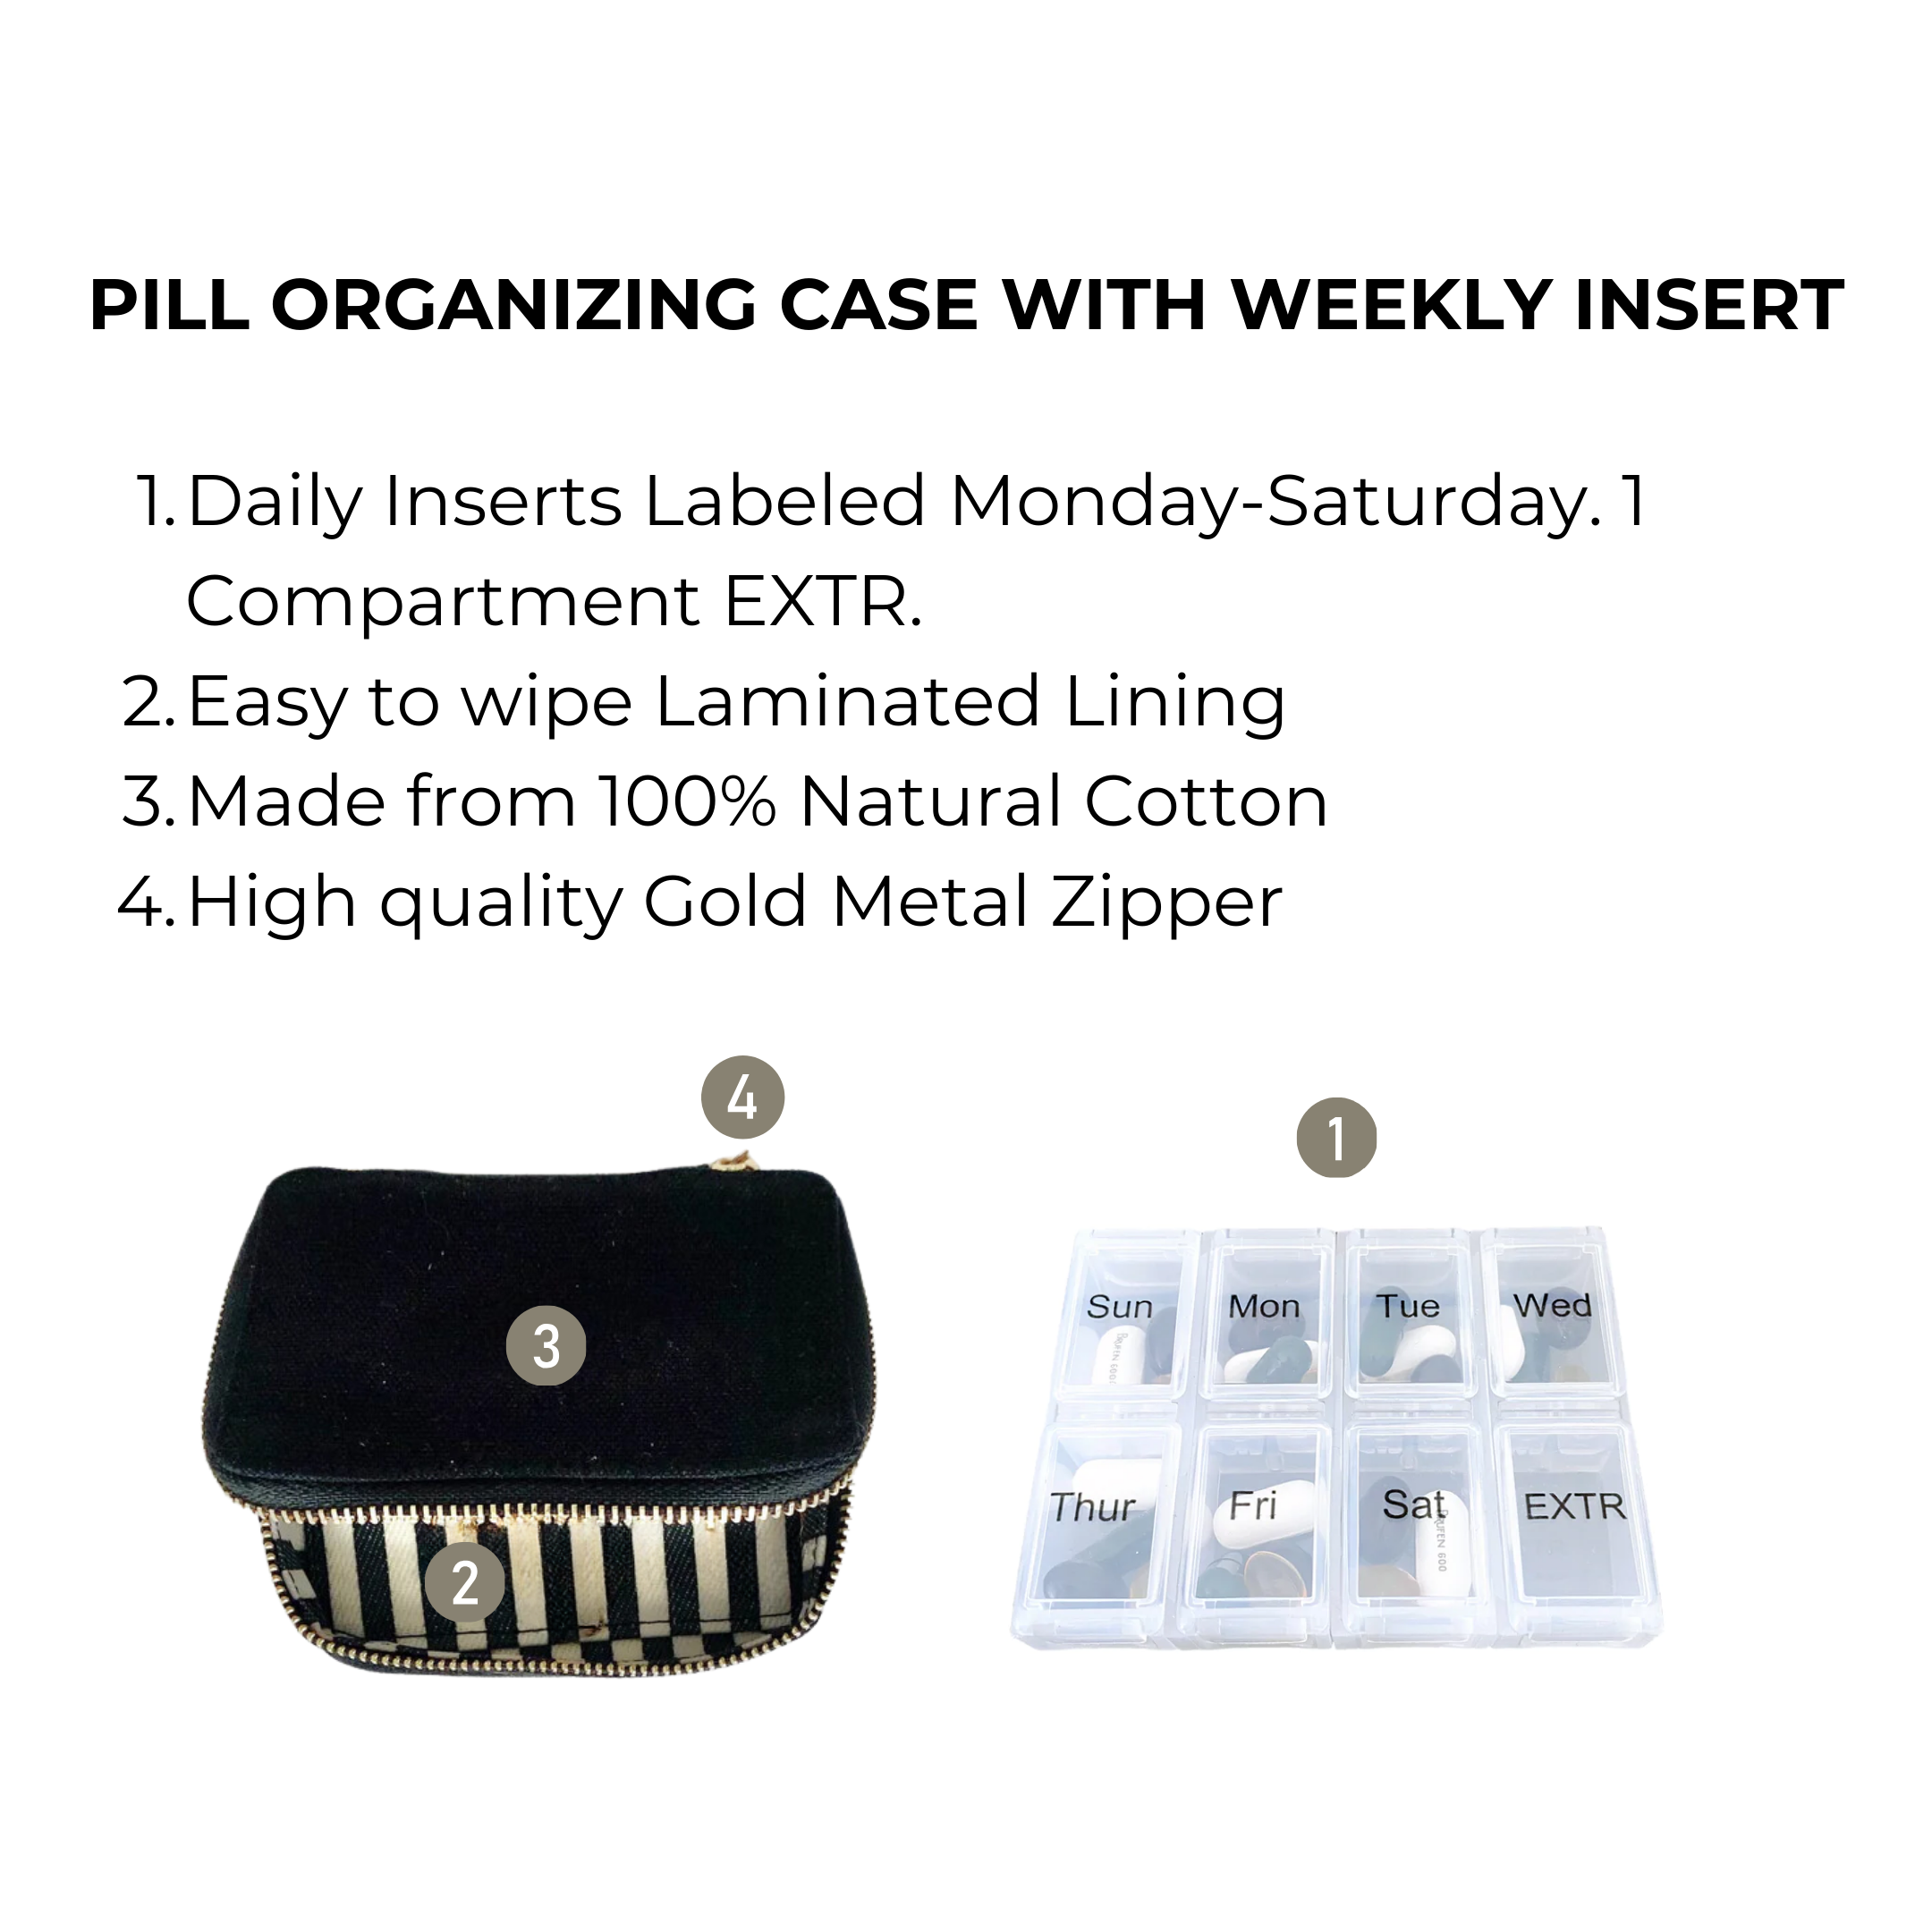 Pill Organizing Case with Weekly Insert, Black | Bag-all